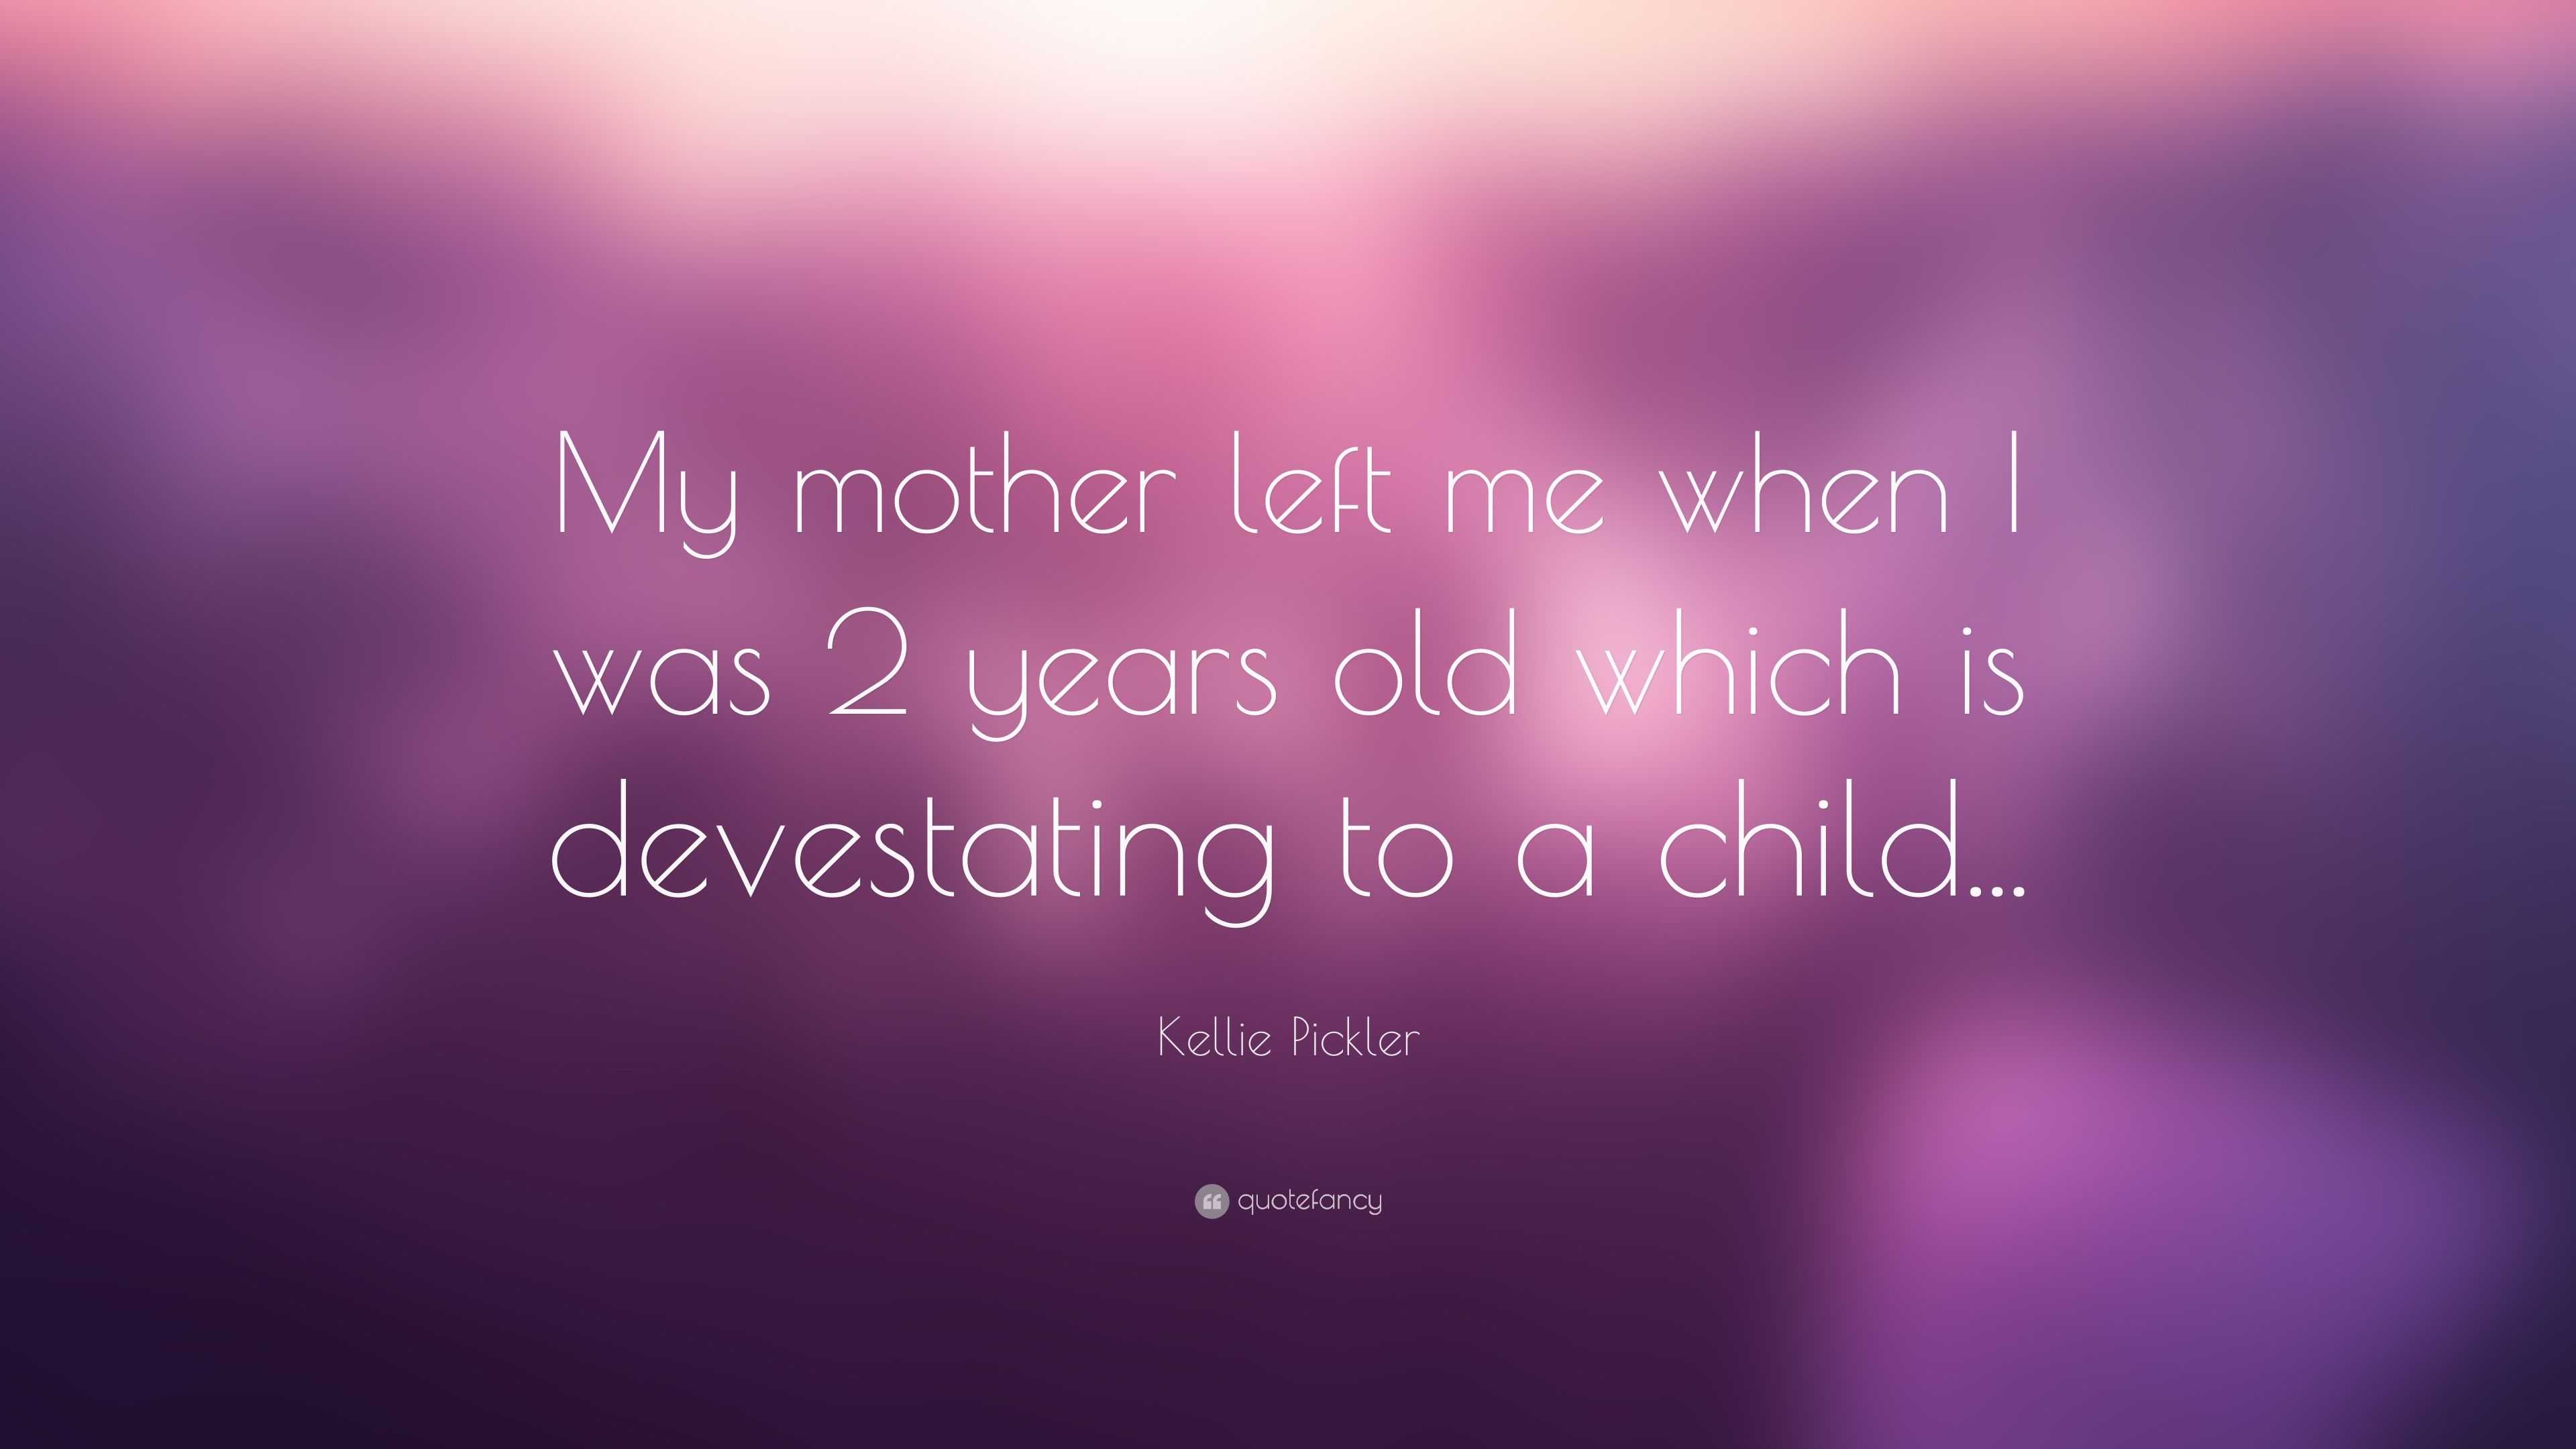 Kellie Pickler Quote: “My mother left me when I was 2 years old which ...